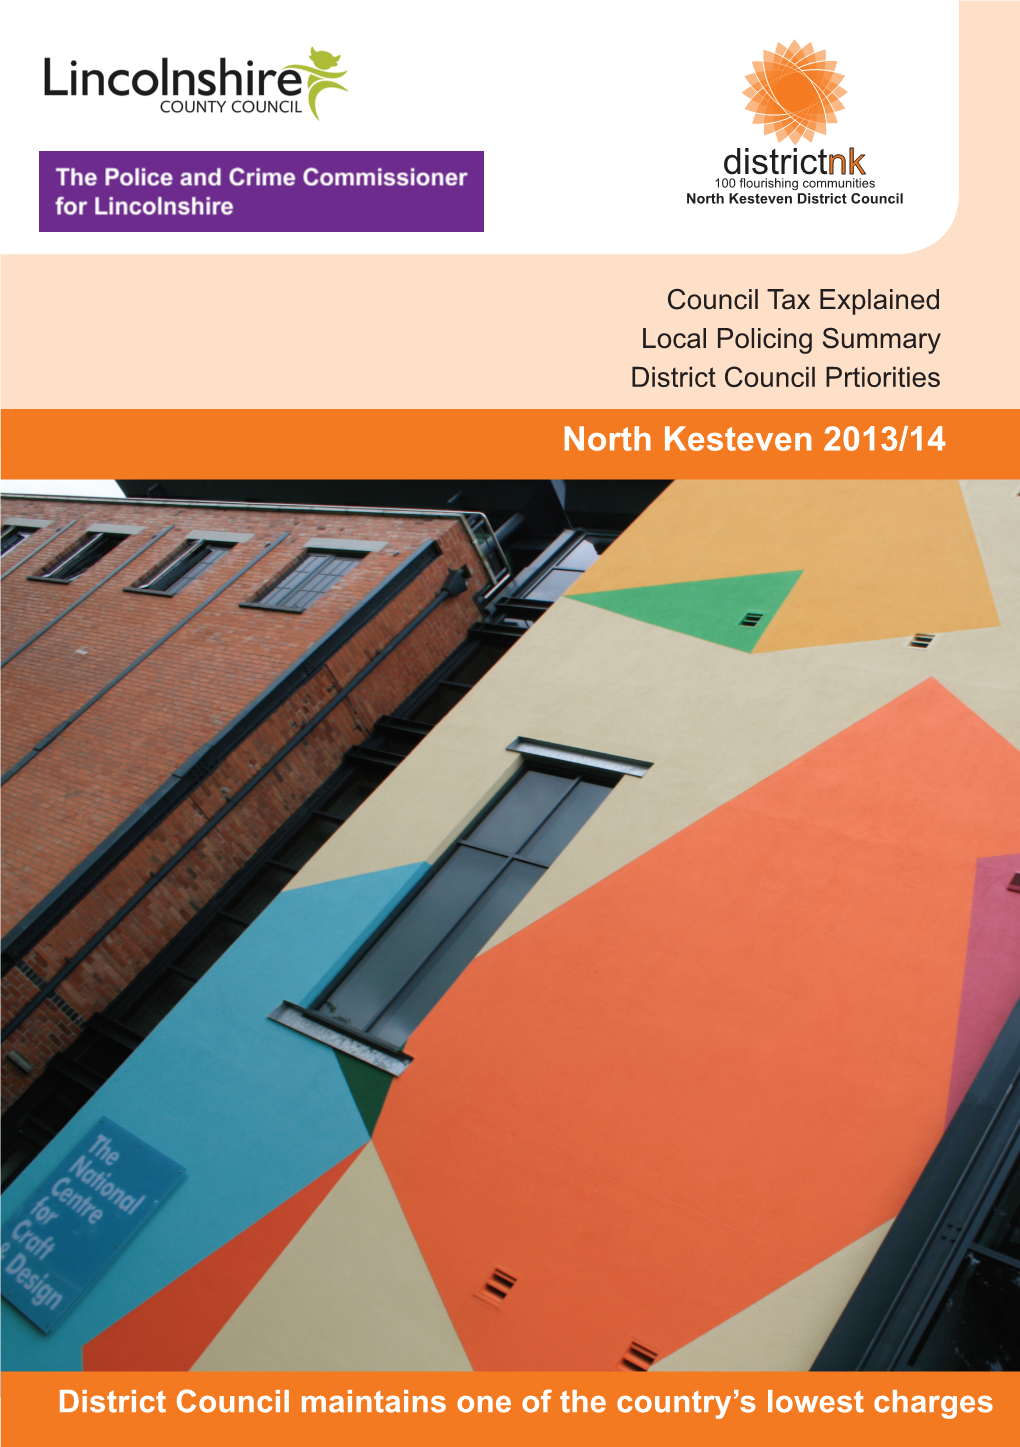 NKDC Council Tax Guide 2013/14